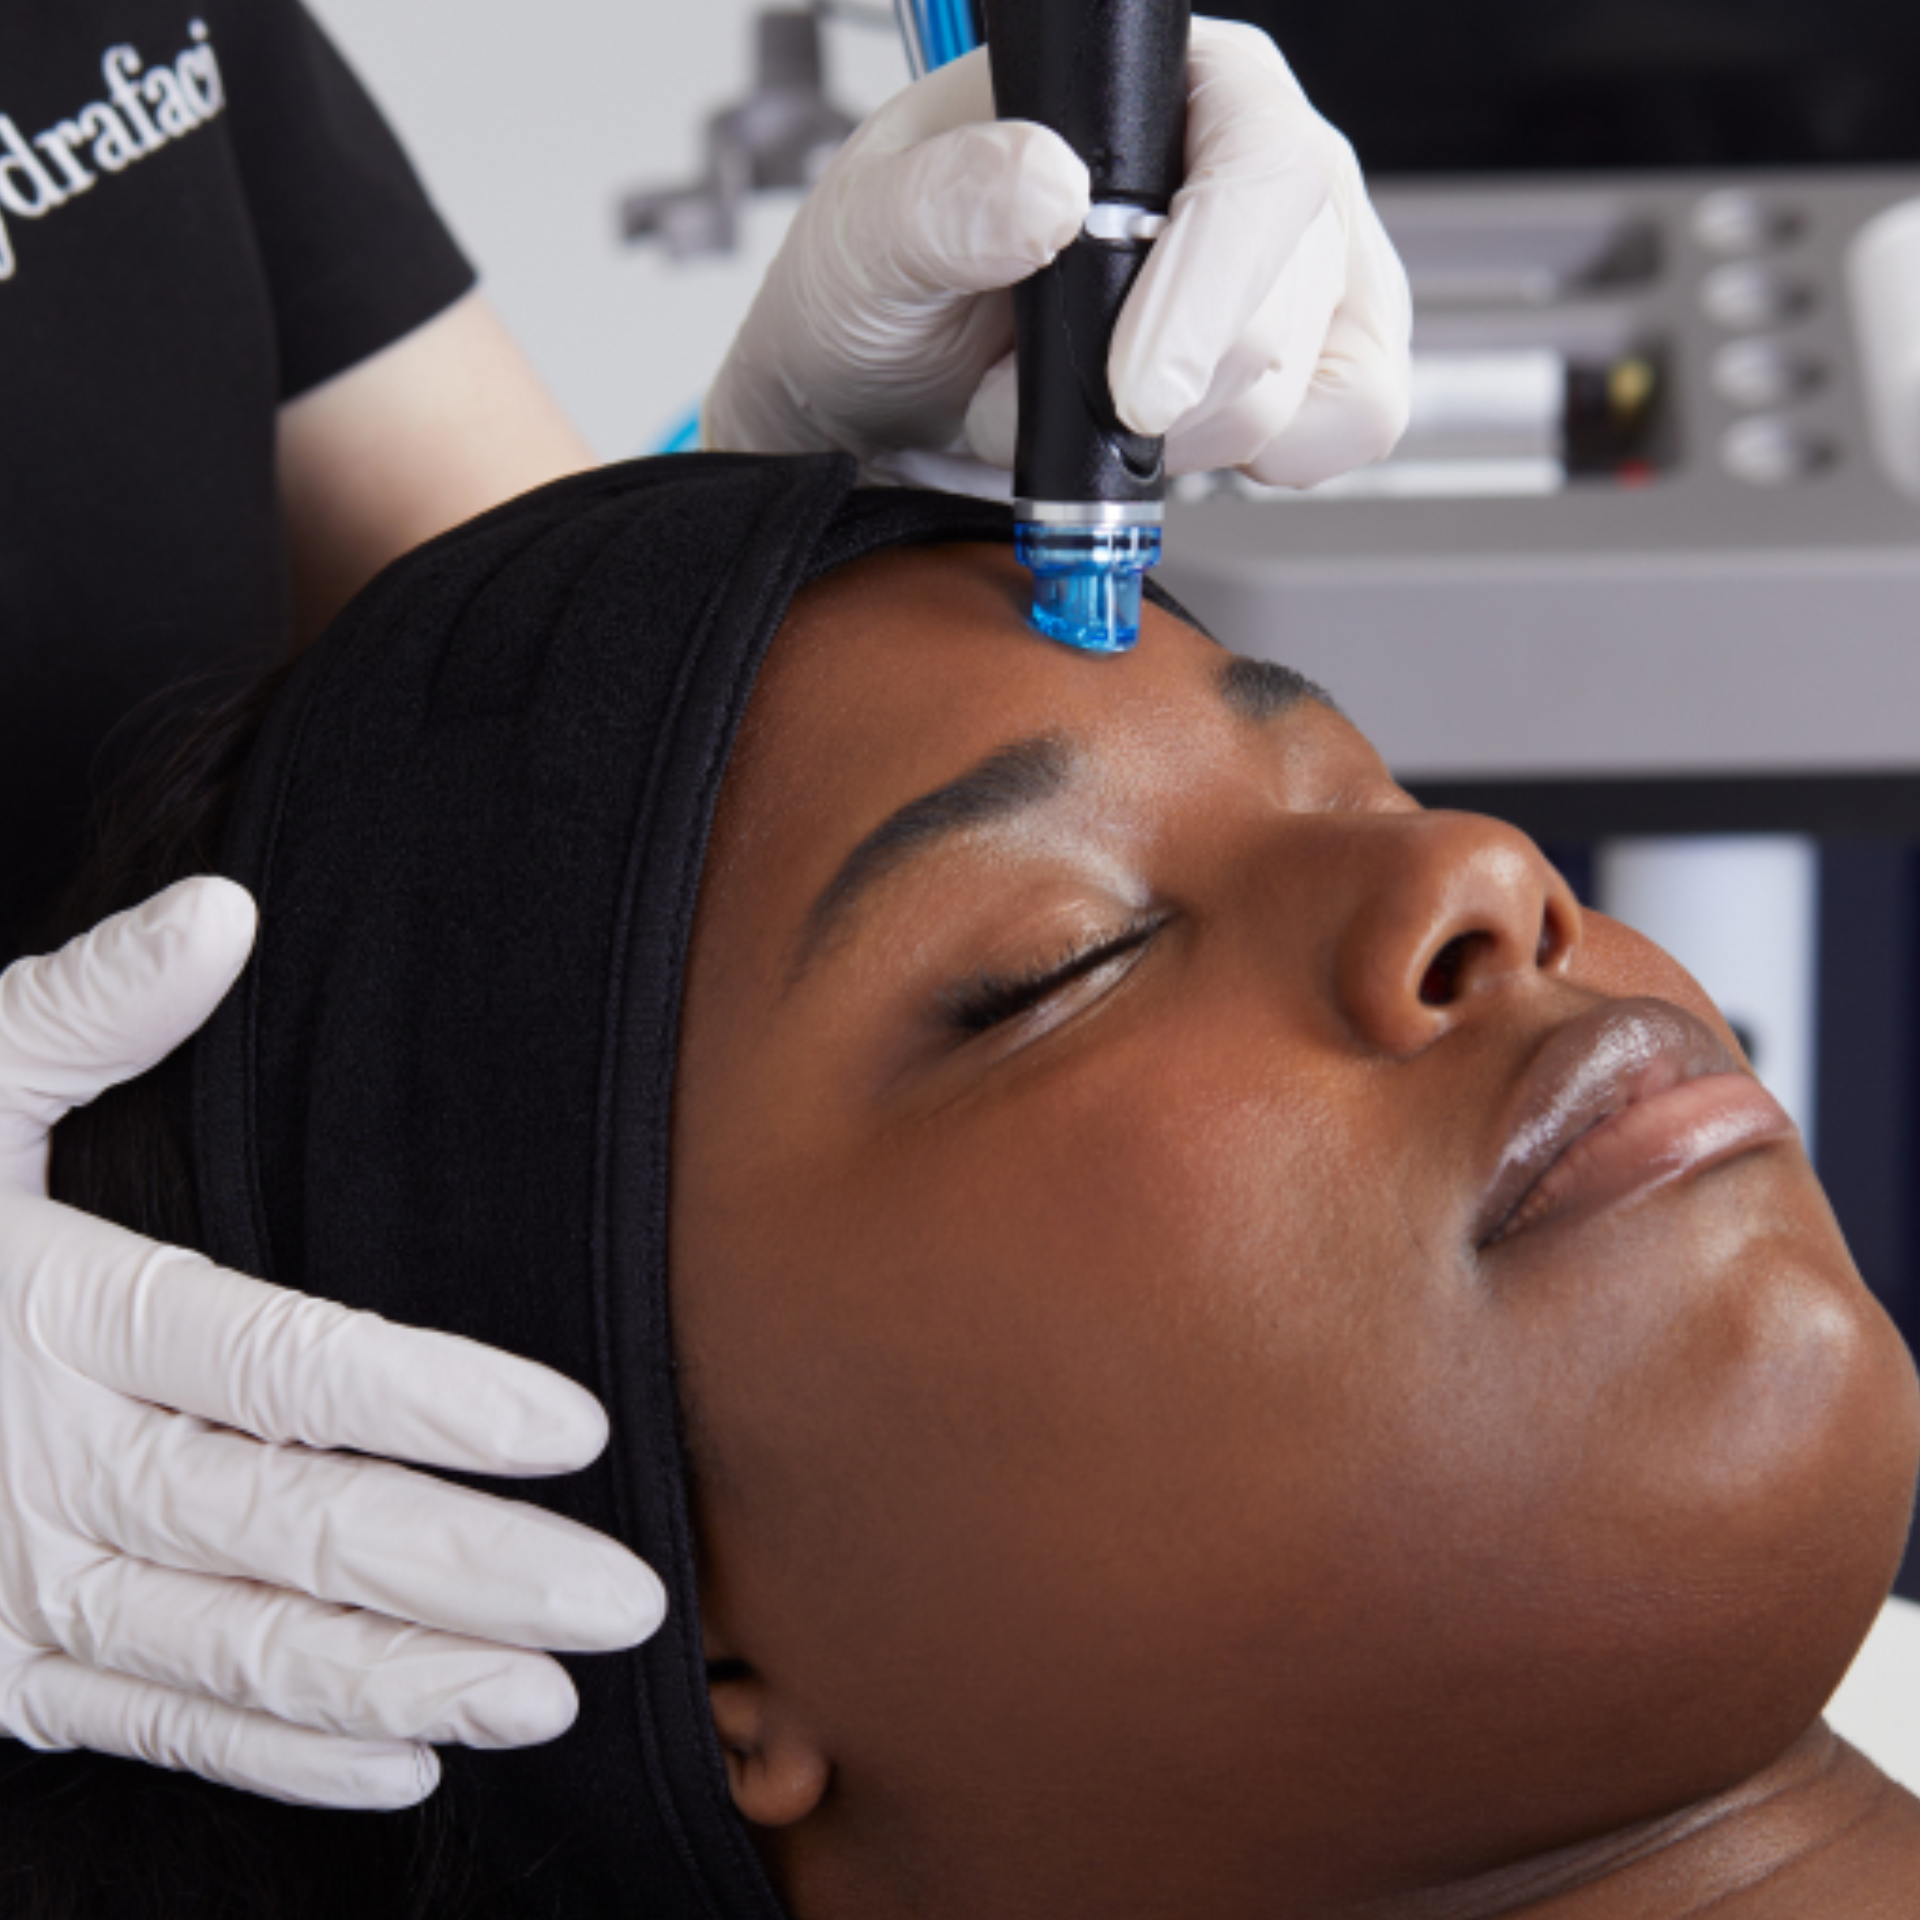 Joanna our Senior Aesthetic Practitioner performs an advanced Hydrafacial treatment for glowing skin at Medicetics London